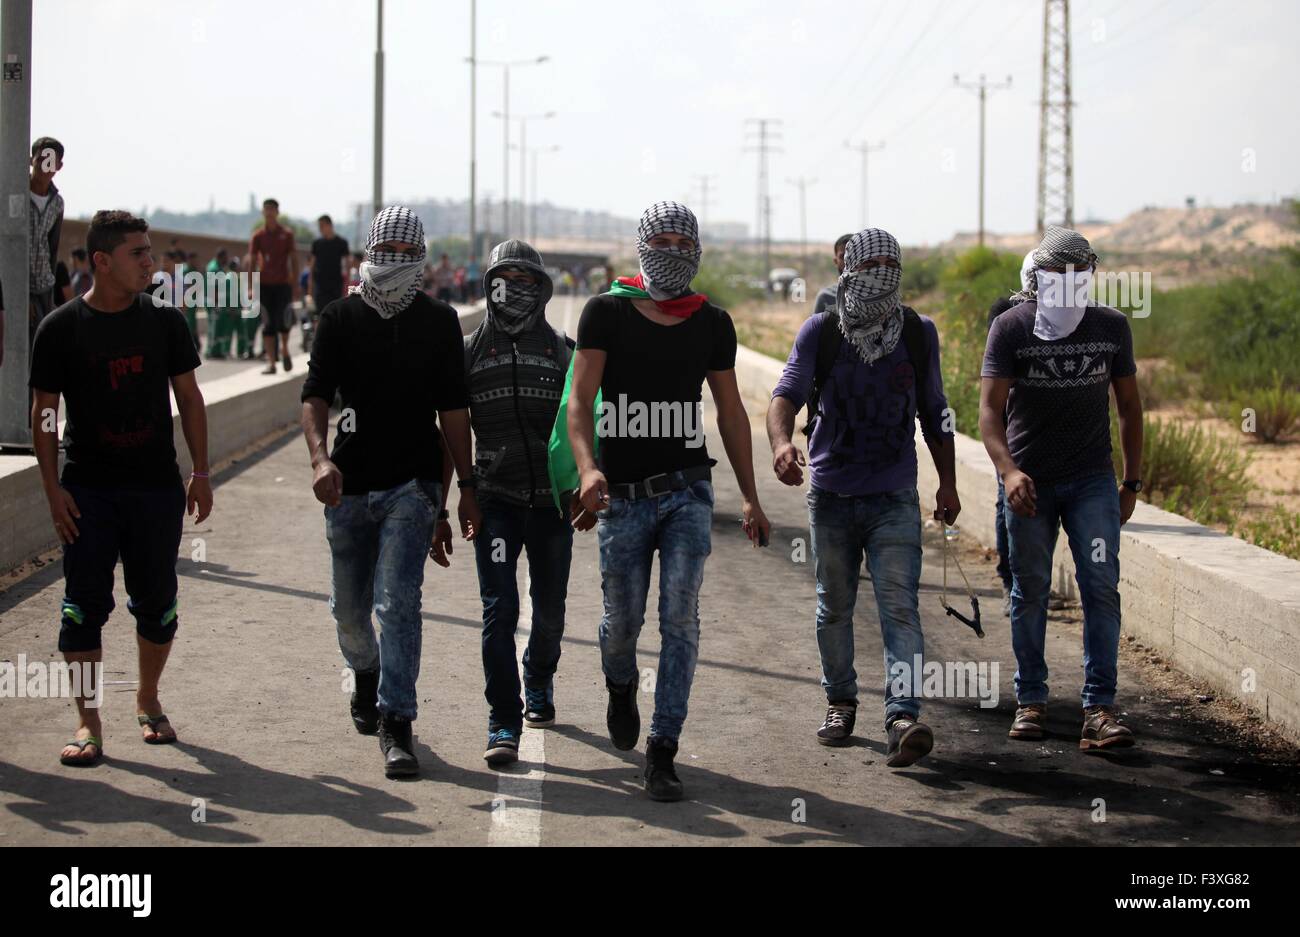 Erez, Gaza Strip, Palestinian Territory. 13th Oct, 2015. Palestinian protesters clash with Israeli security forces next to the border fence with Israel, at the Erez crossing in the northern Gaza strip, on October 13, 2015. A wave of stabbings that hit Israel, Jerusalem and the West Bank this month along with violent protests in annexed east Jerusalem and the occupied West Bank, has led to warnings that a full-scale Palestinian uprising, or third intifada, could erupt. The unrest has also spread to the Gaza Strip, with clashes along the border in recent days leaving nine Palestinians dead from Stock Photo